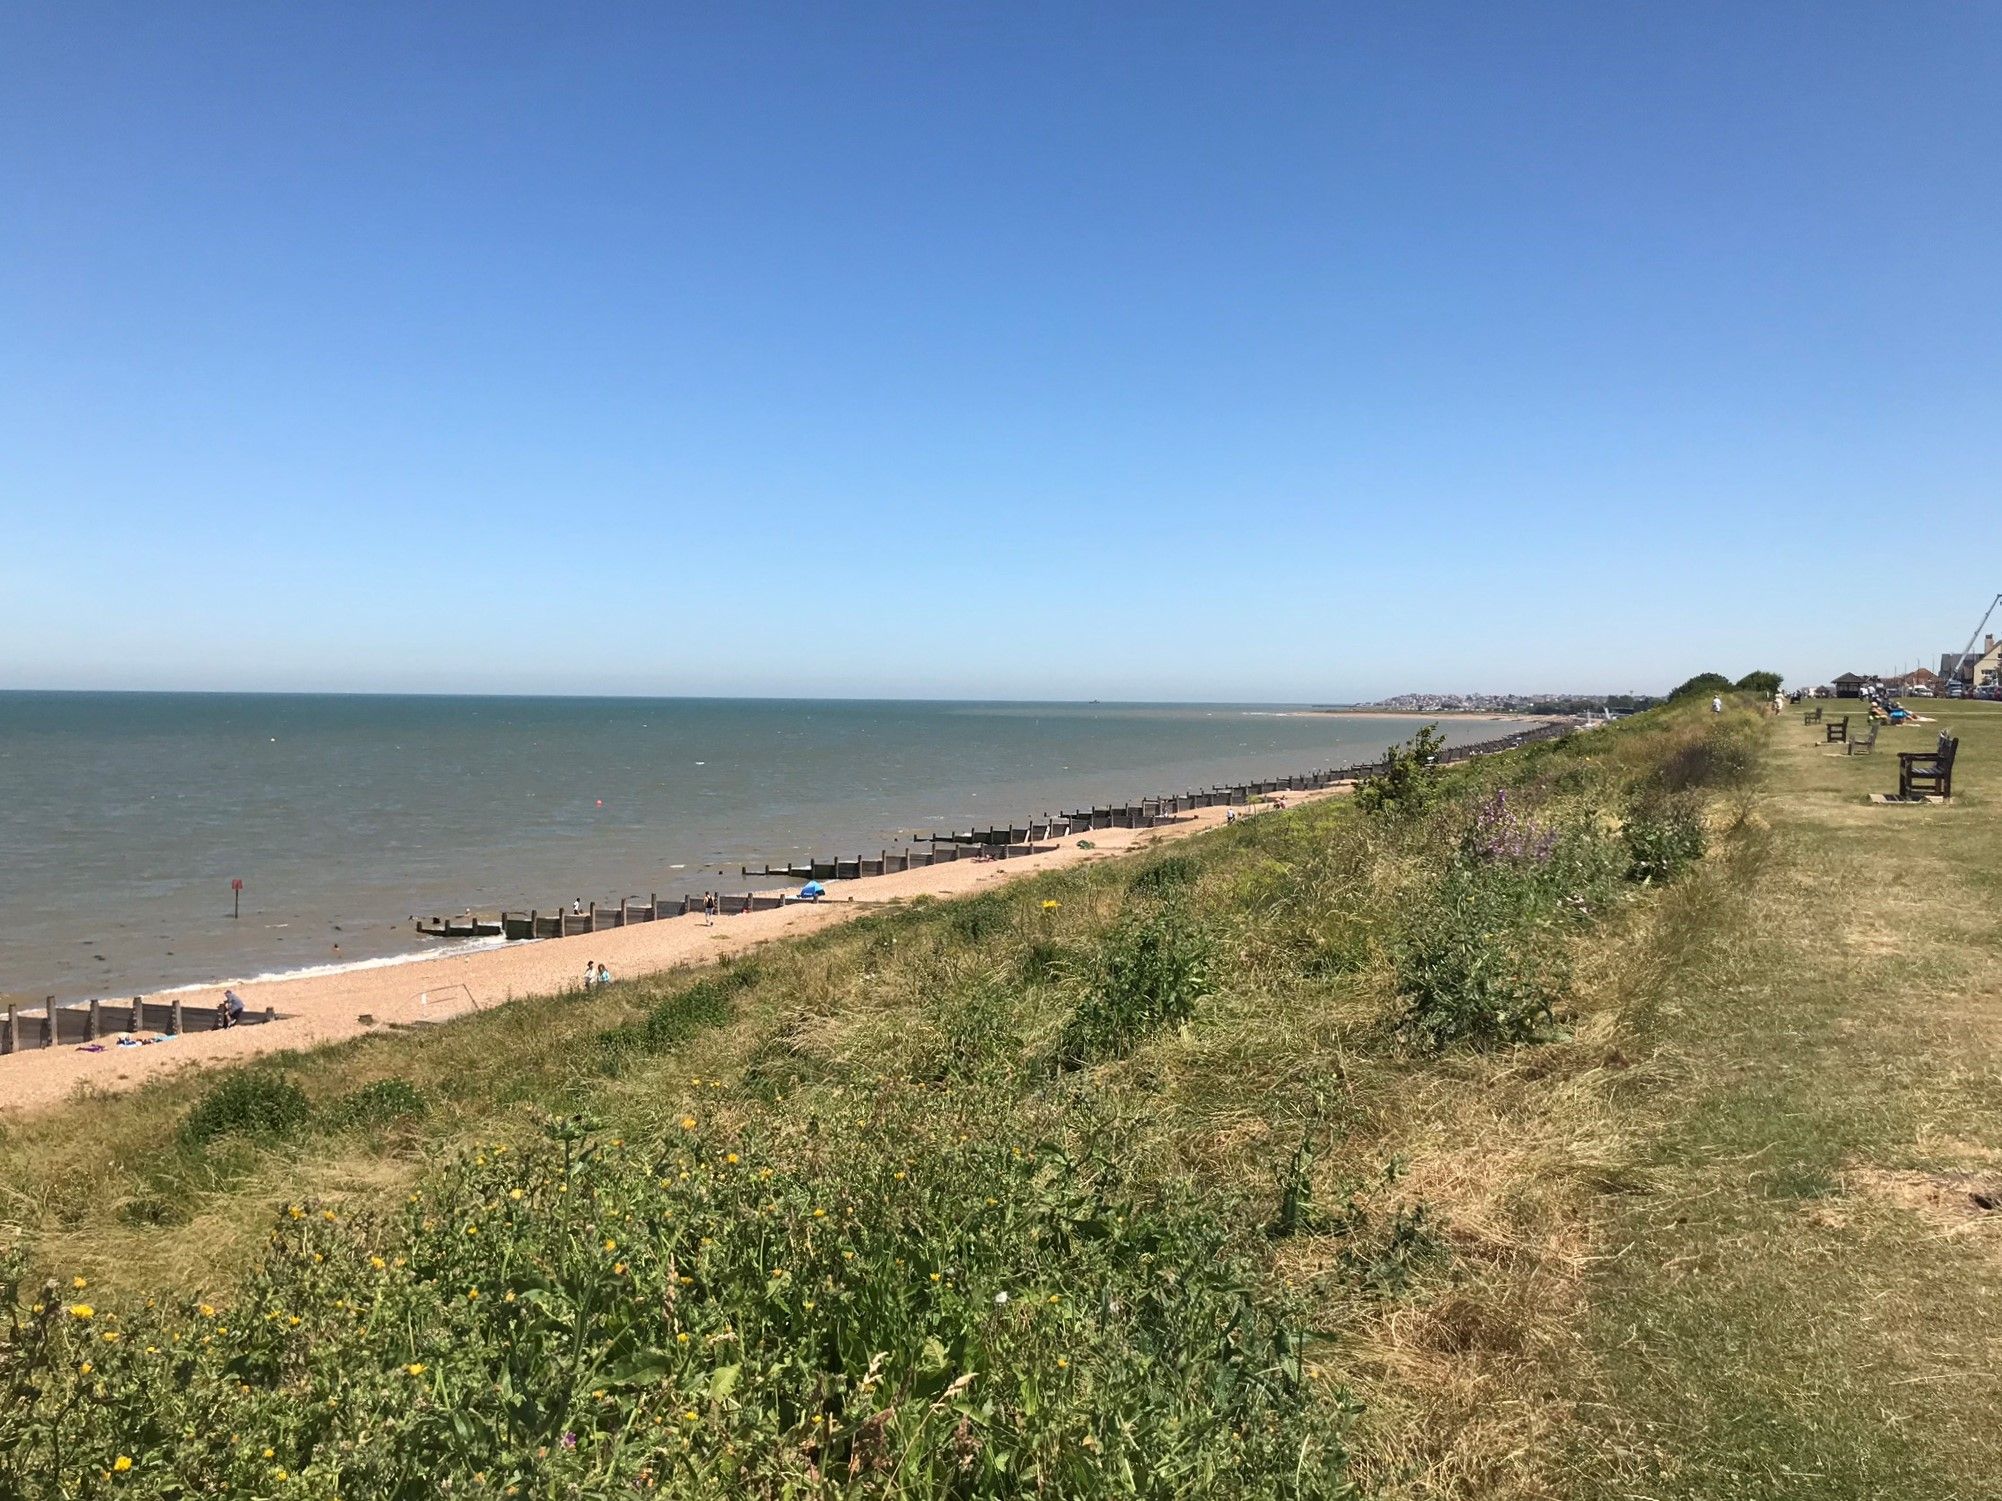 View across Tankerton Slopes and beach towards the west end of the beach